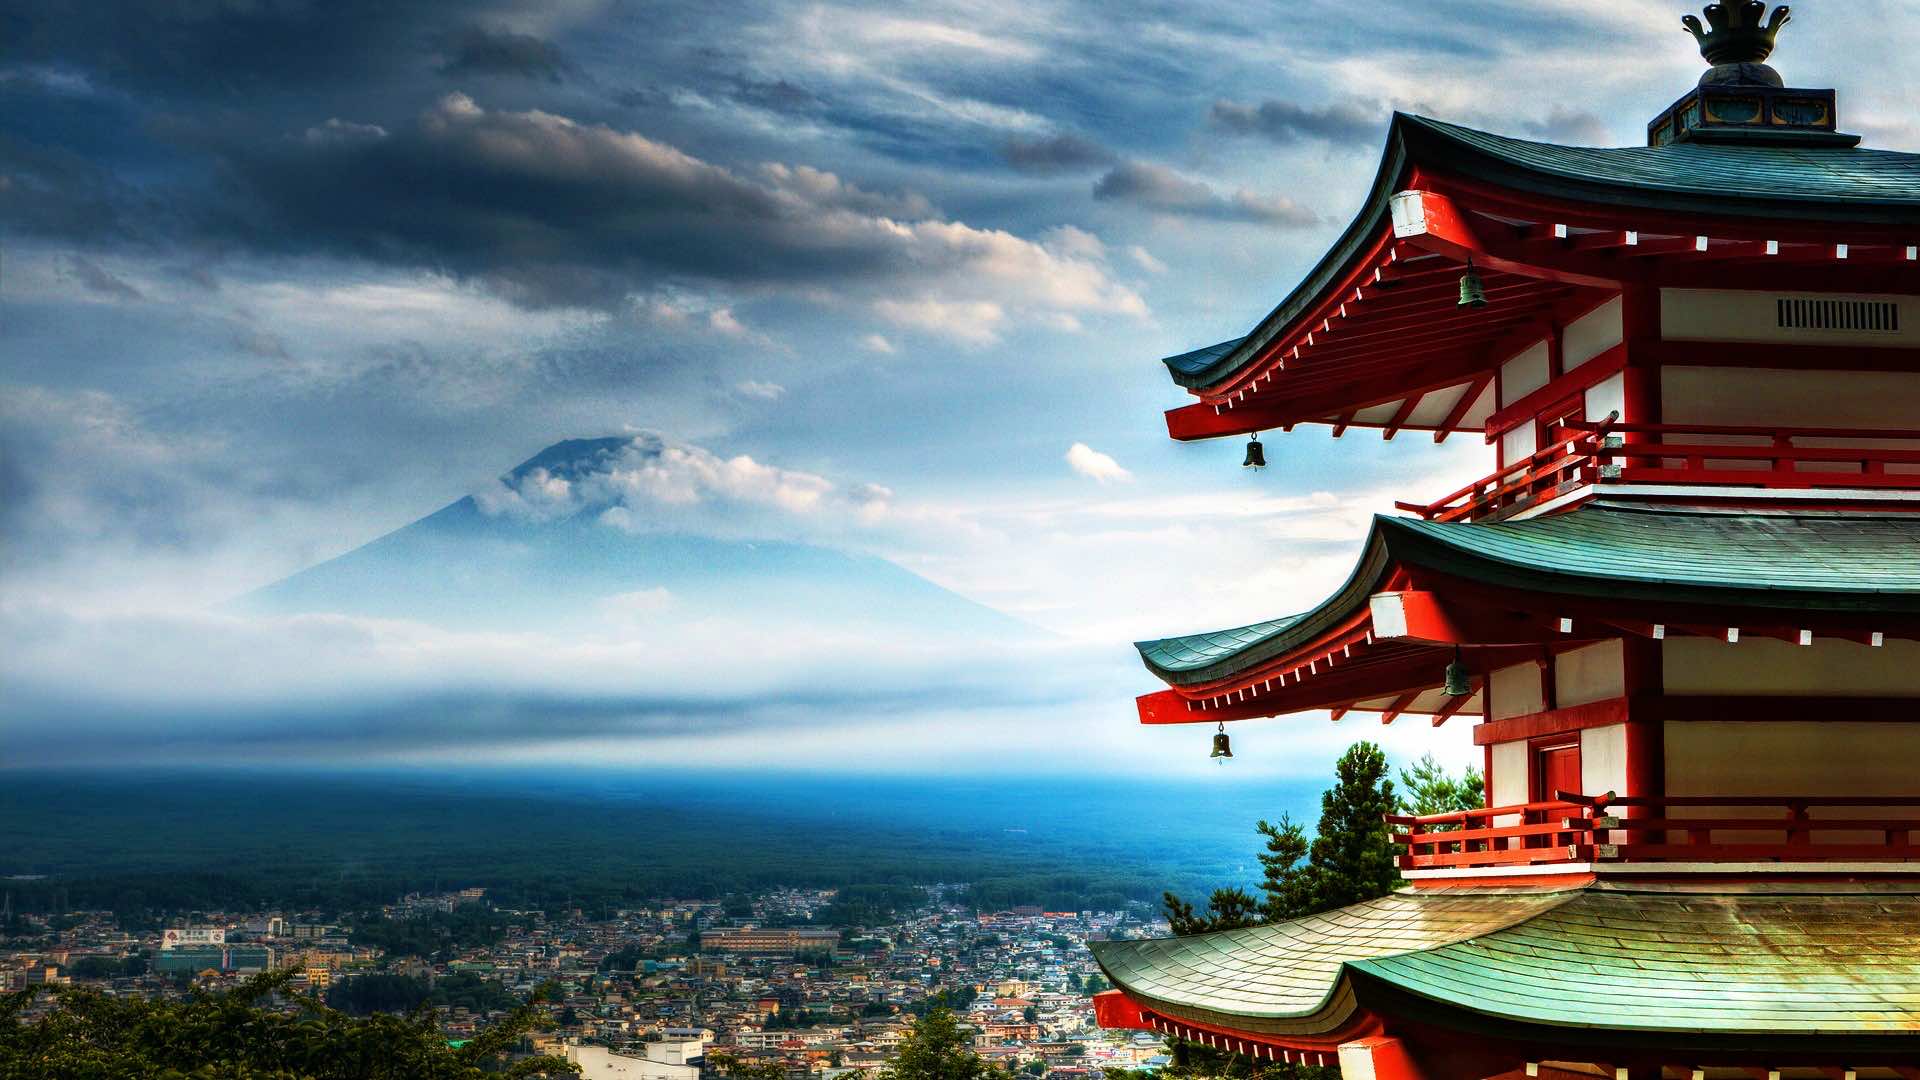 1080p HD Japan Wallpapers For Free Download: The ...